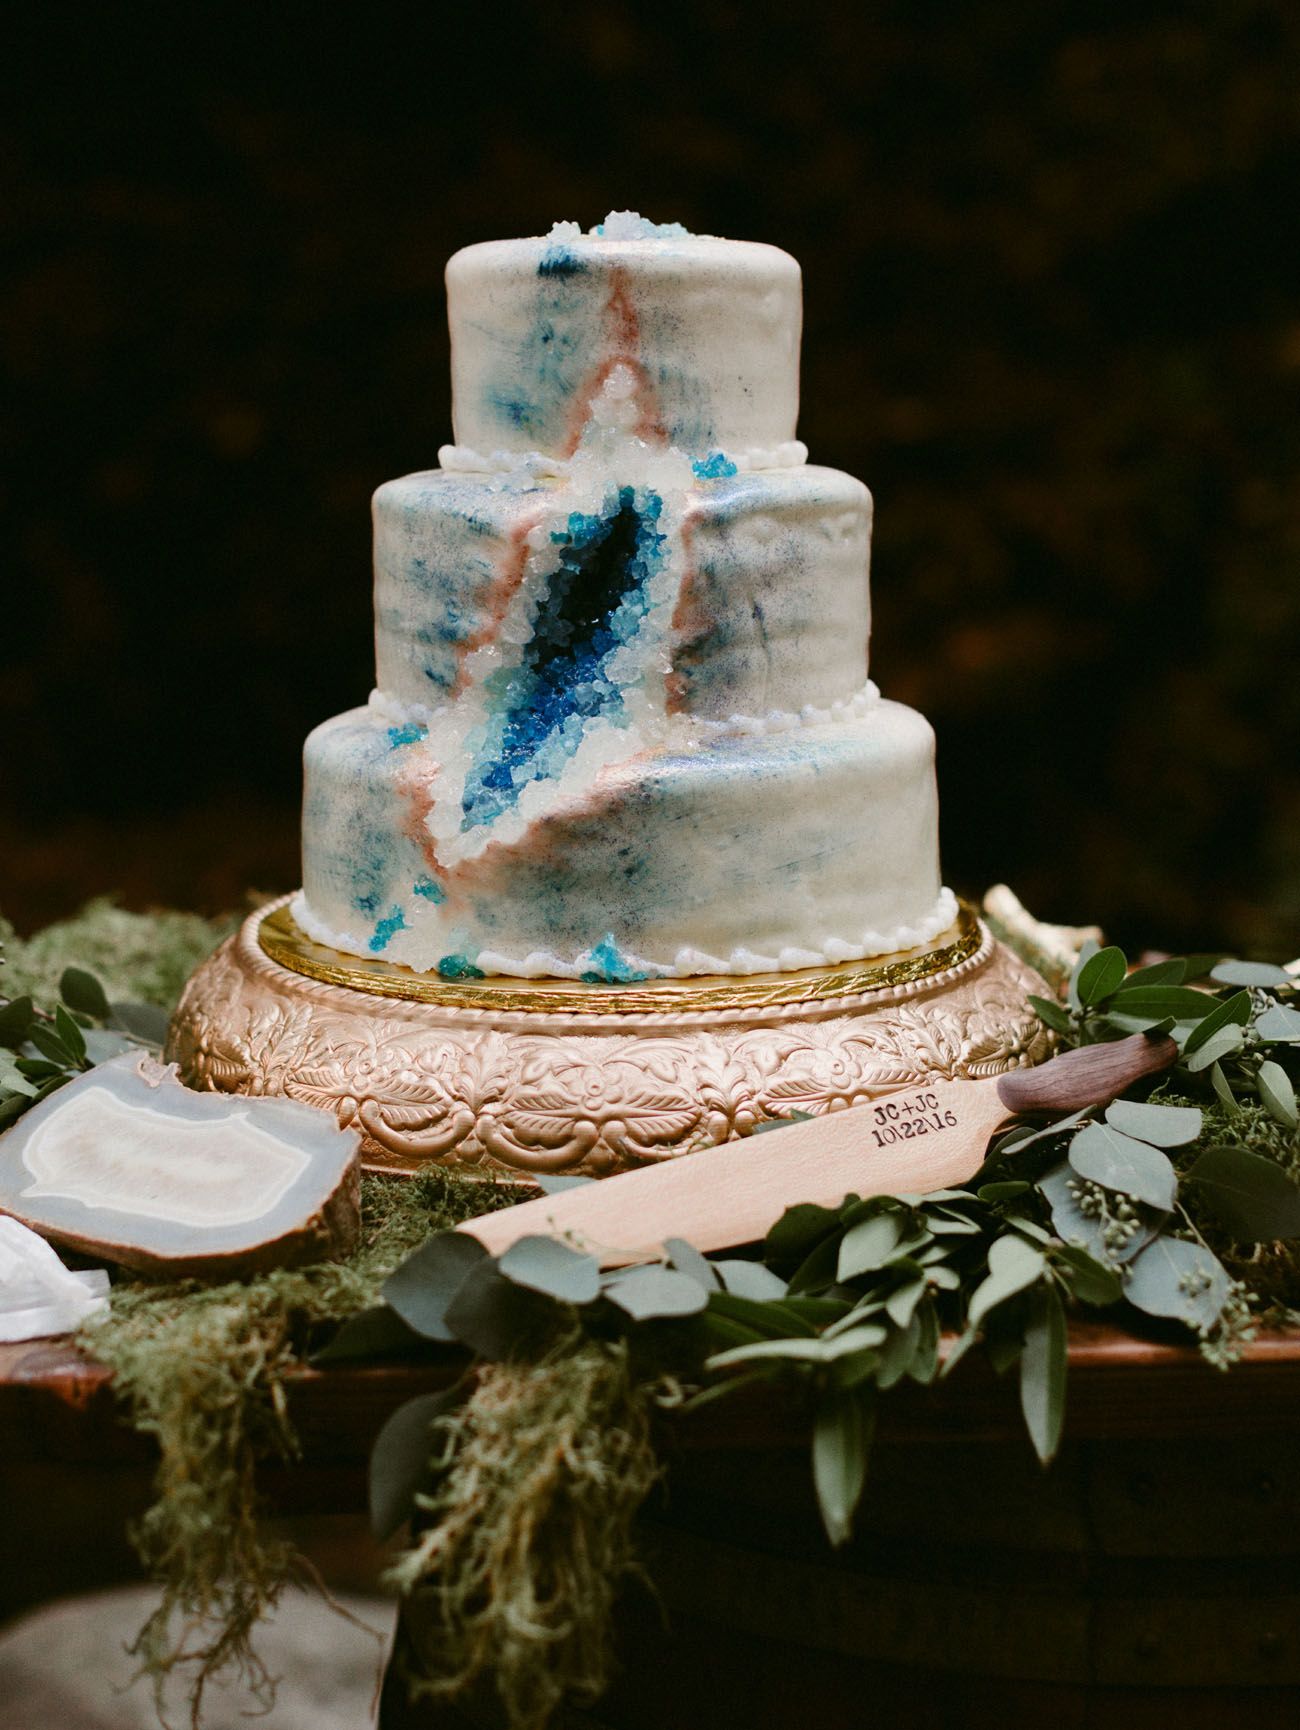 The wedding cake was a geode one